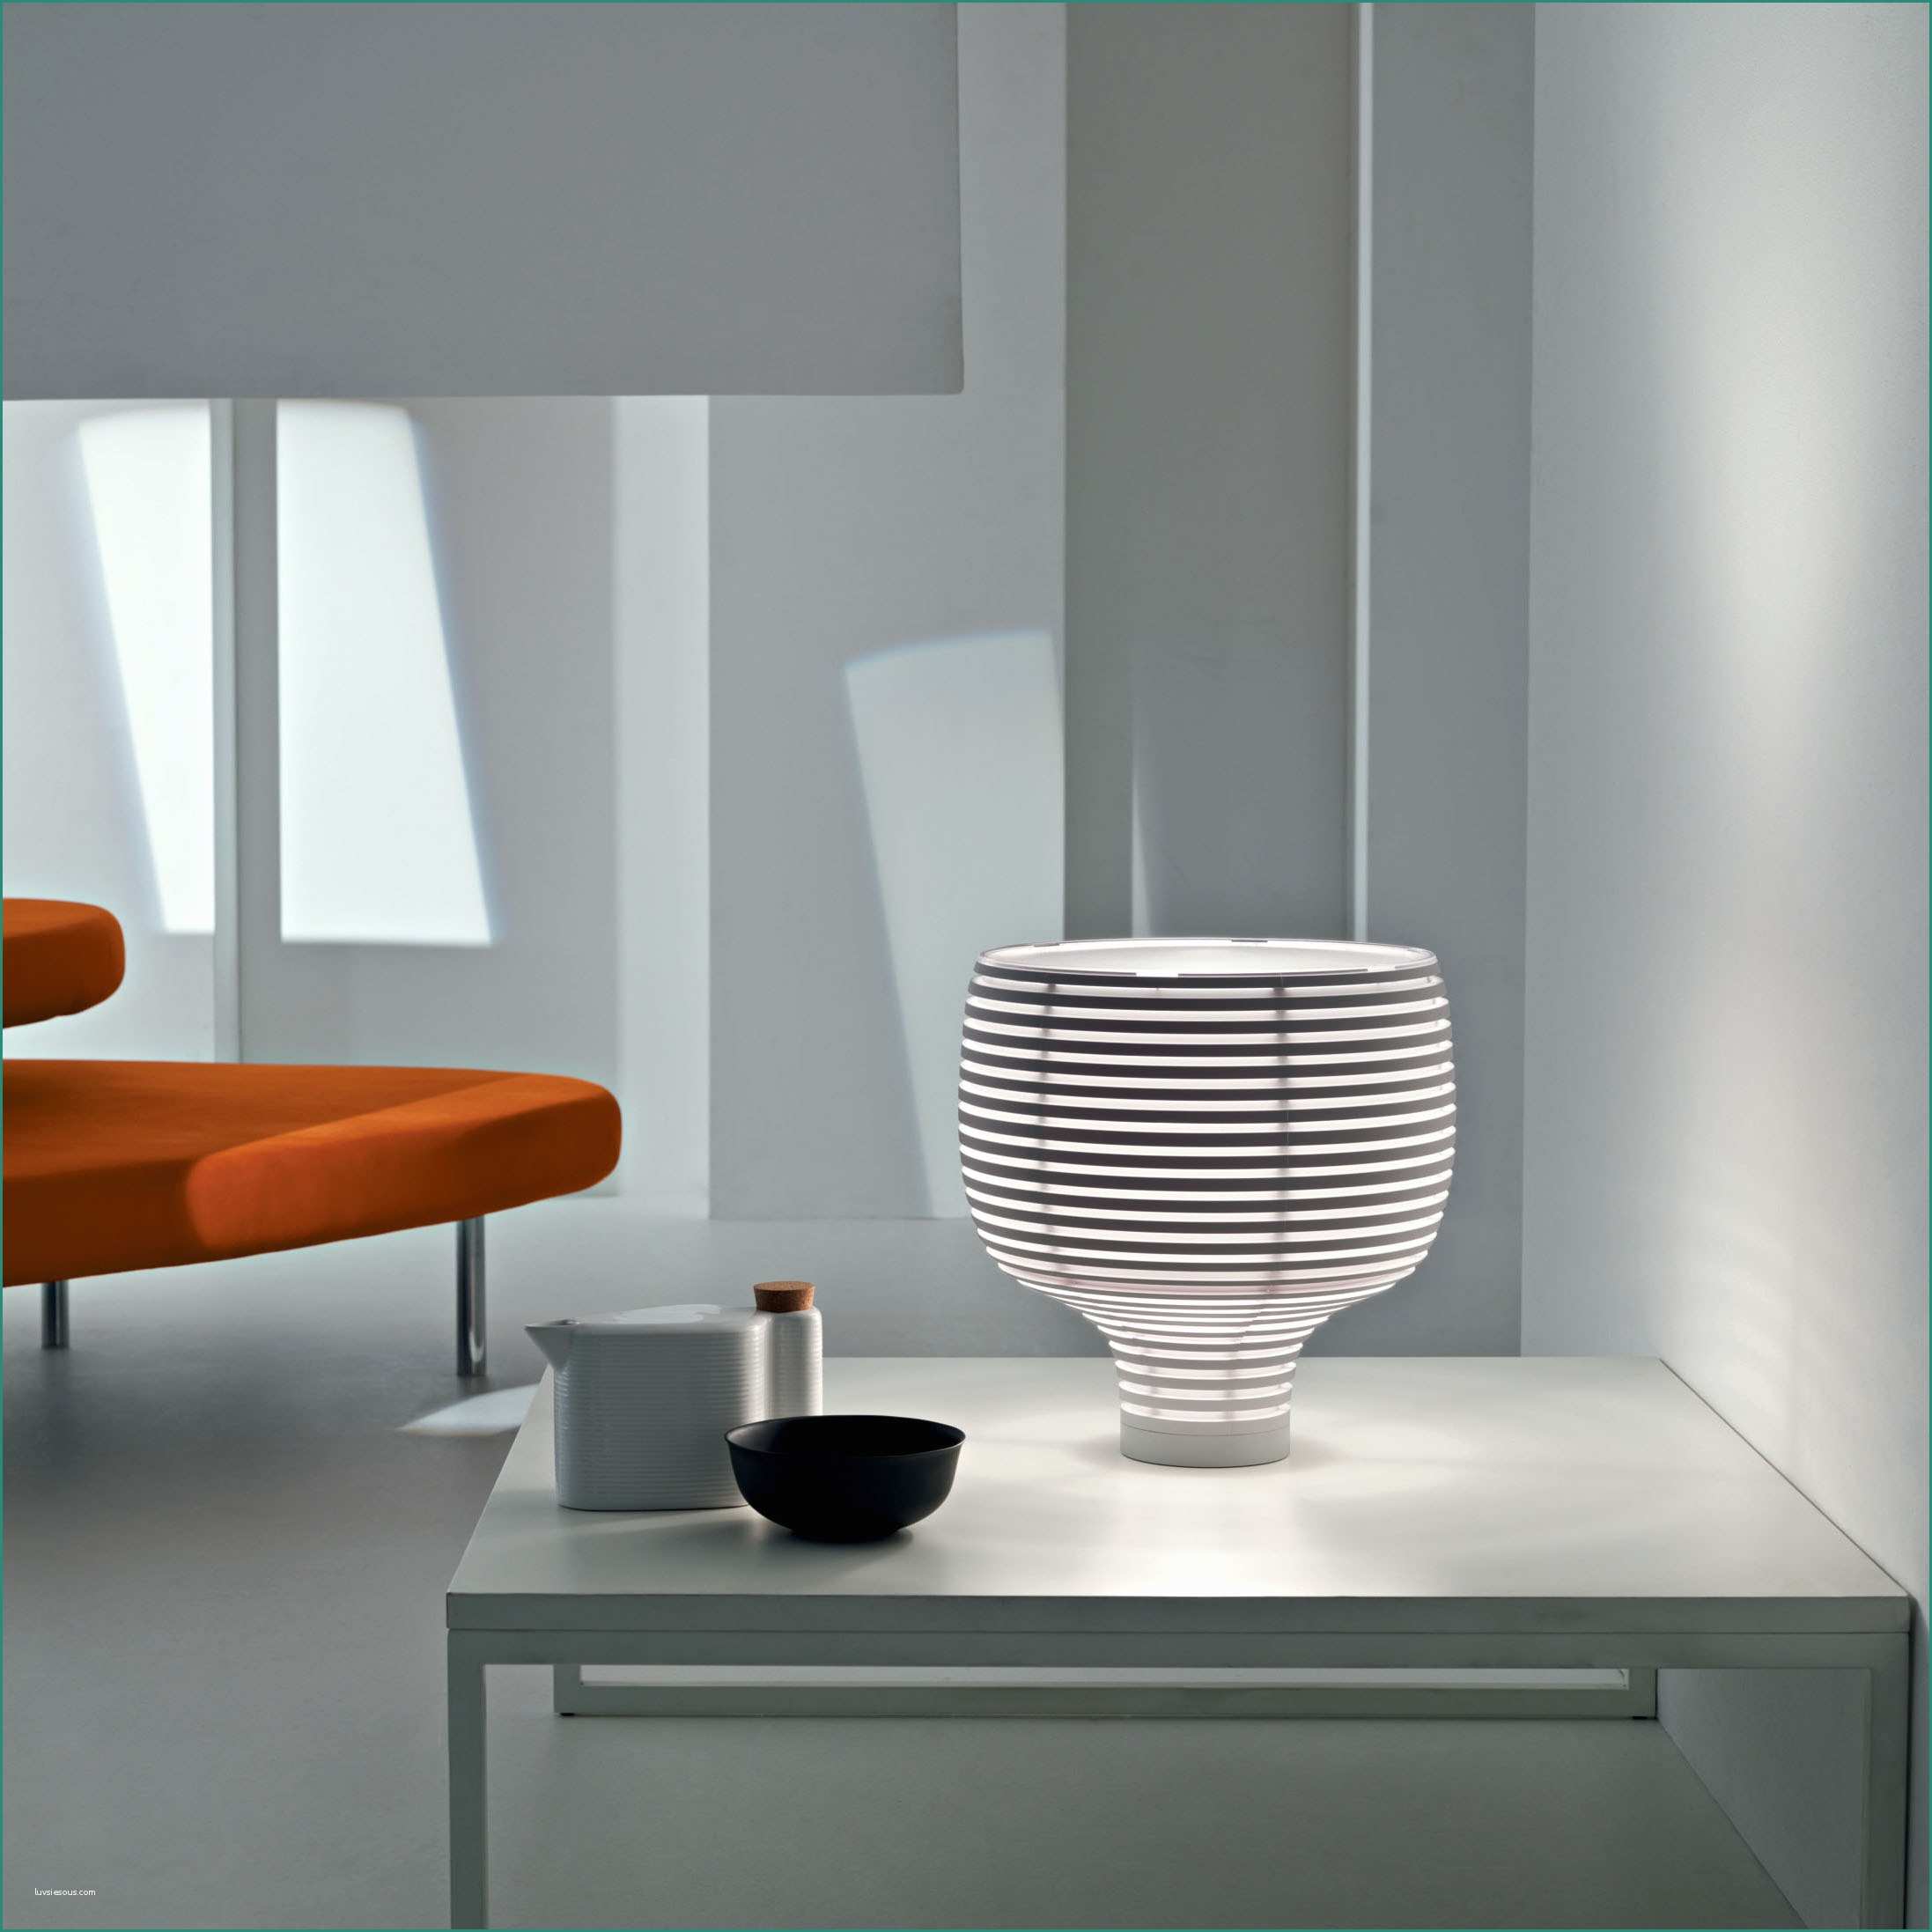 Flos Spun Light E Lumens Highlights Favorite New Lighting and Furniture Products